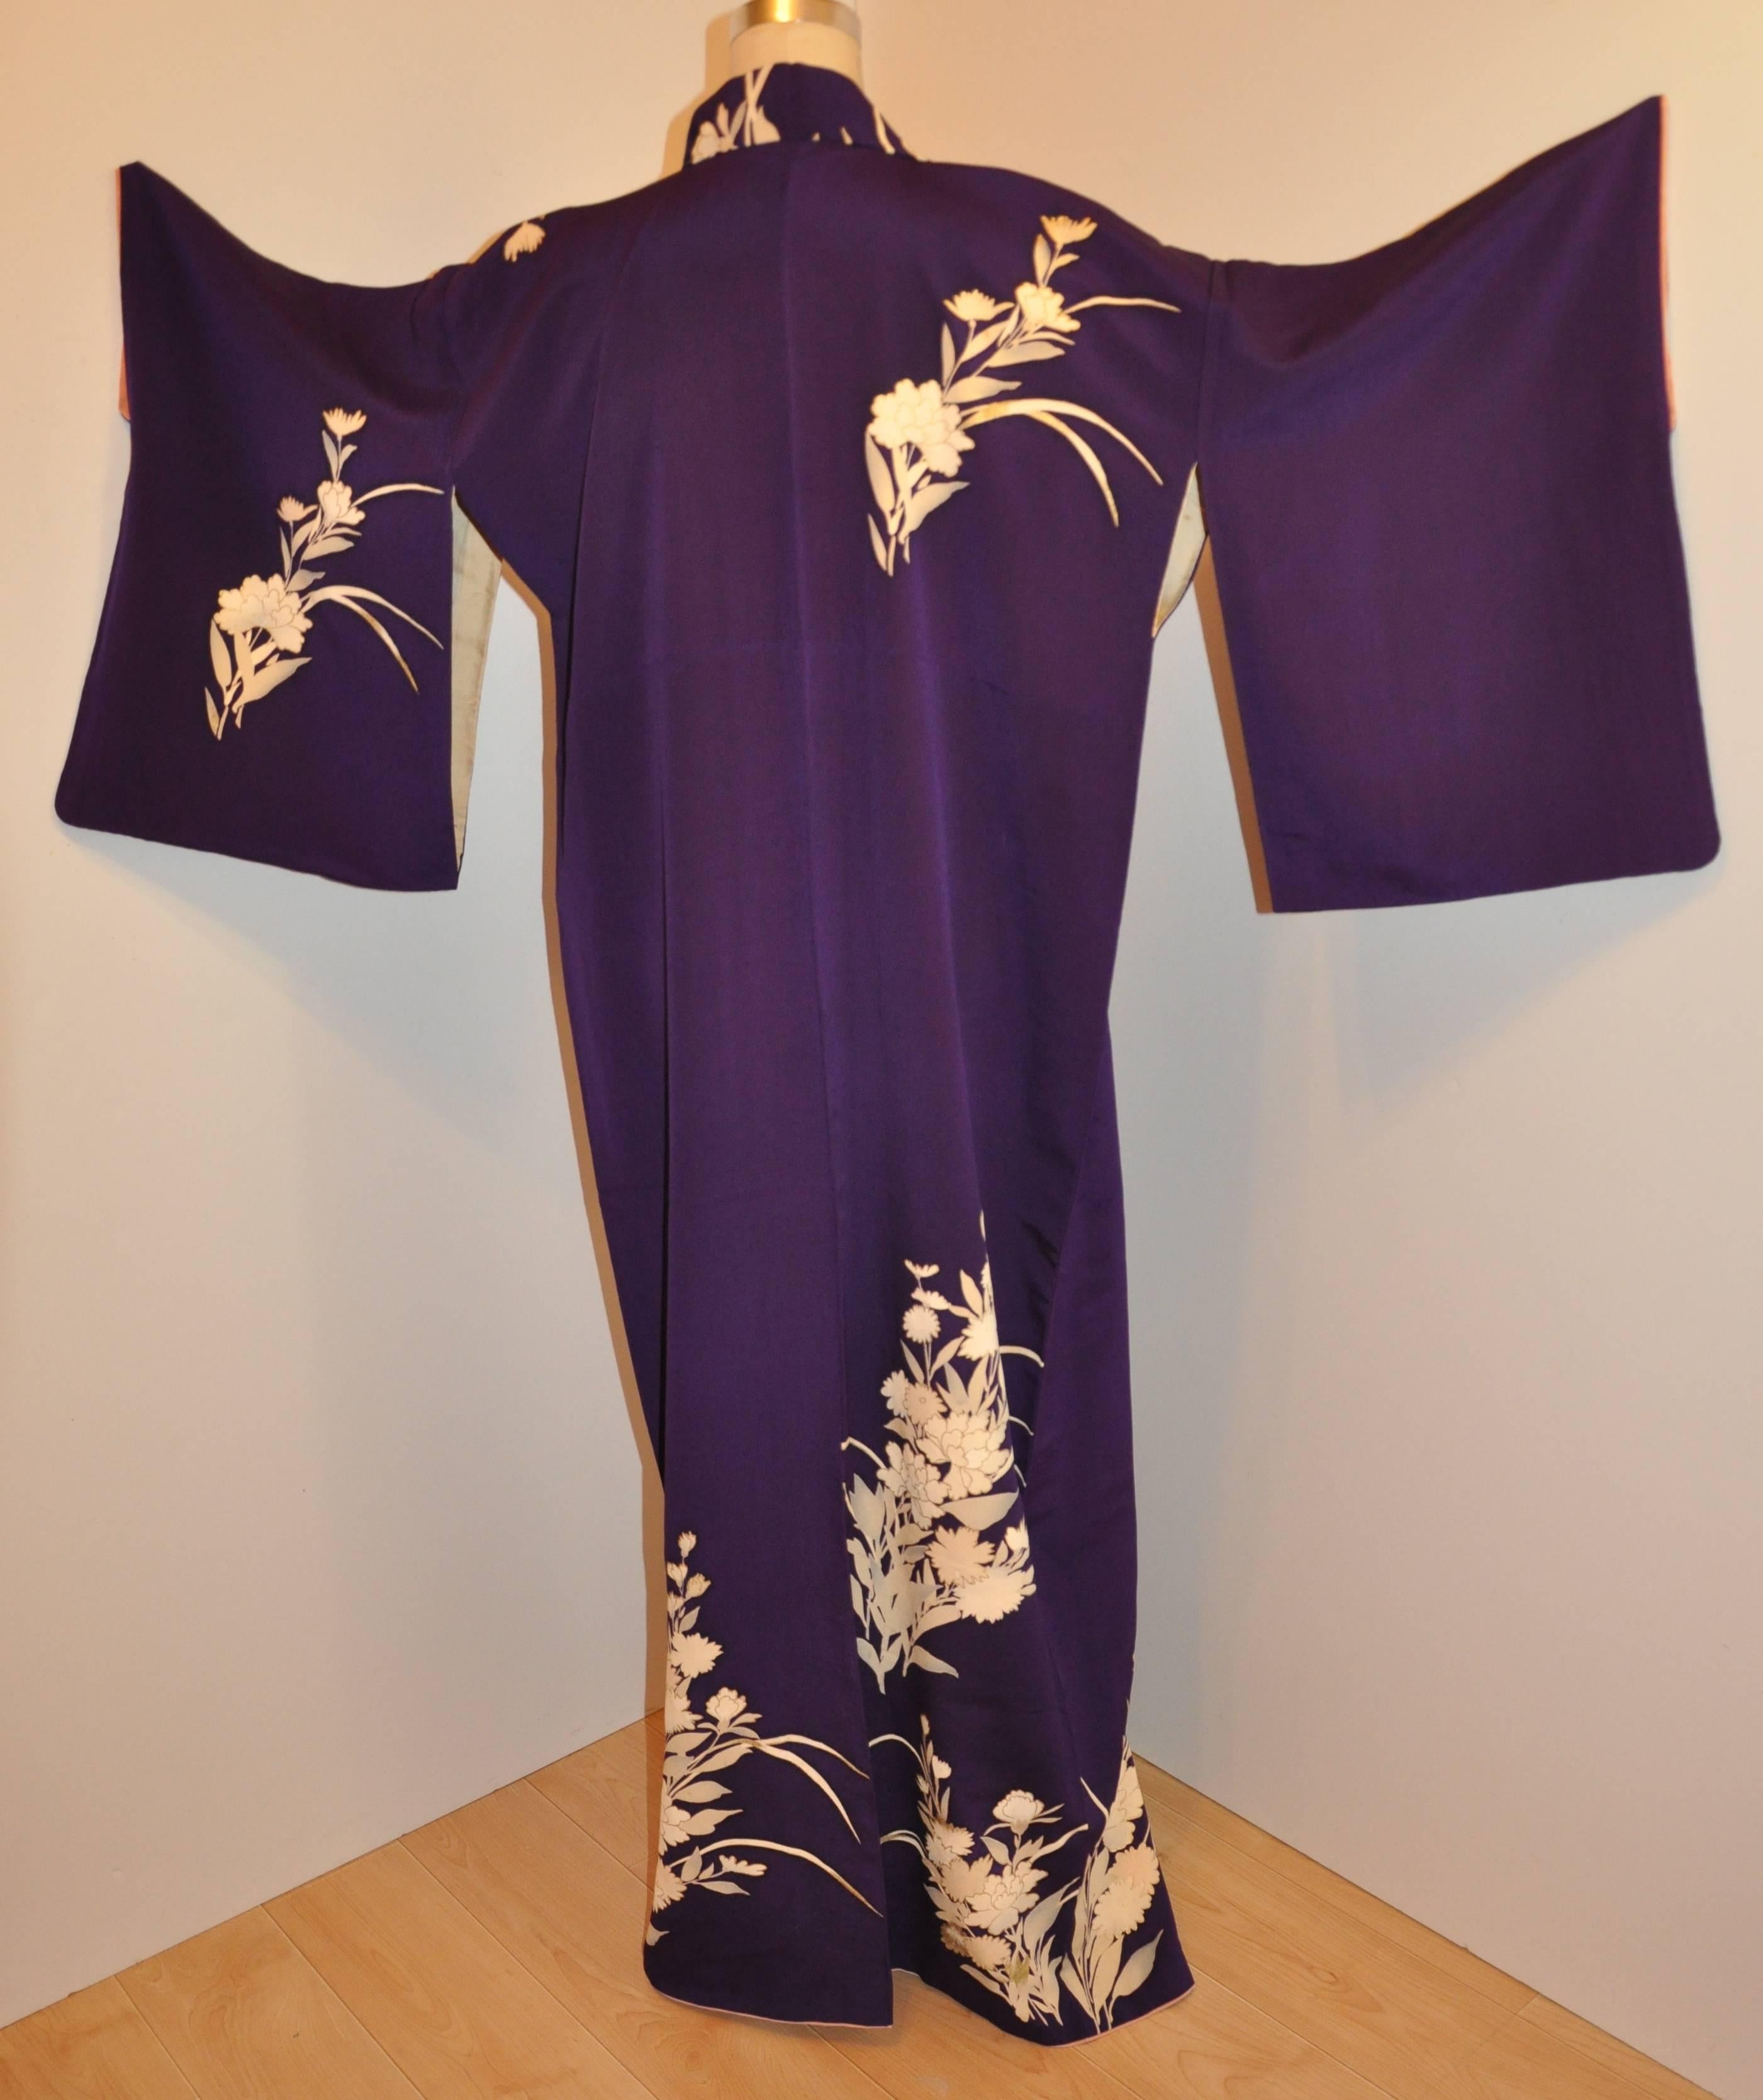        This wonderfully detailed violet silk kimono is accented with cream florals scattered throughout and finished with metallic gold etching outlining some of the florals. The length measures 59